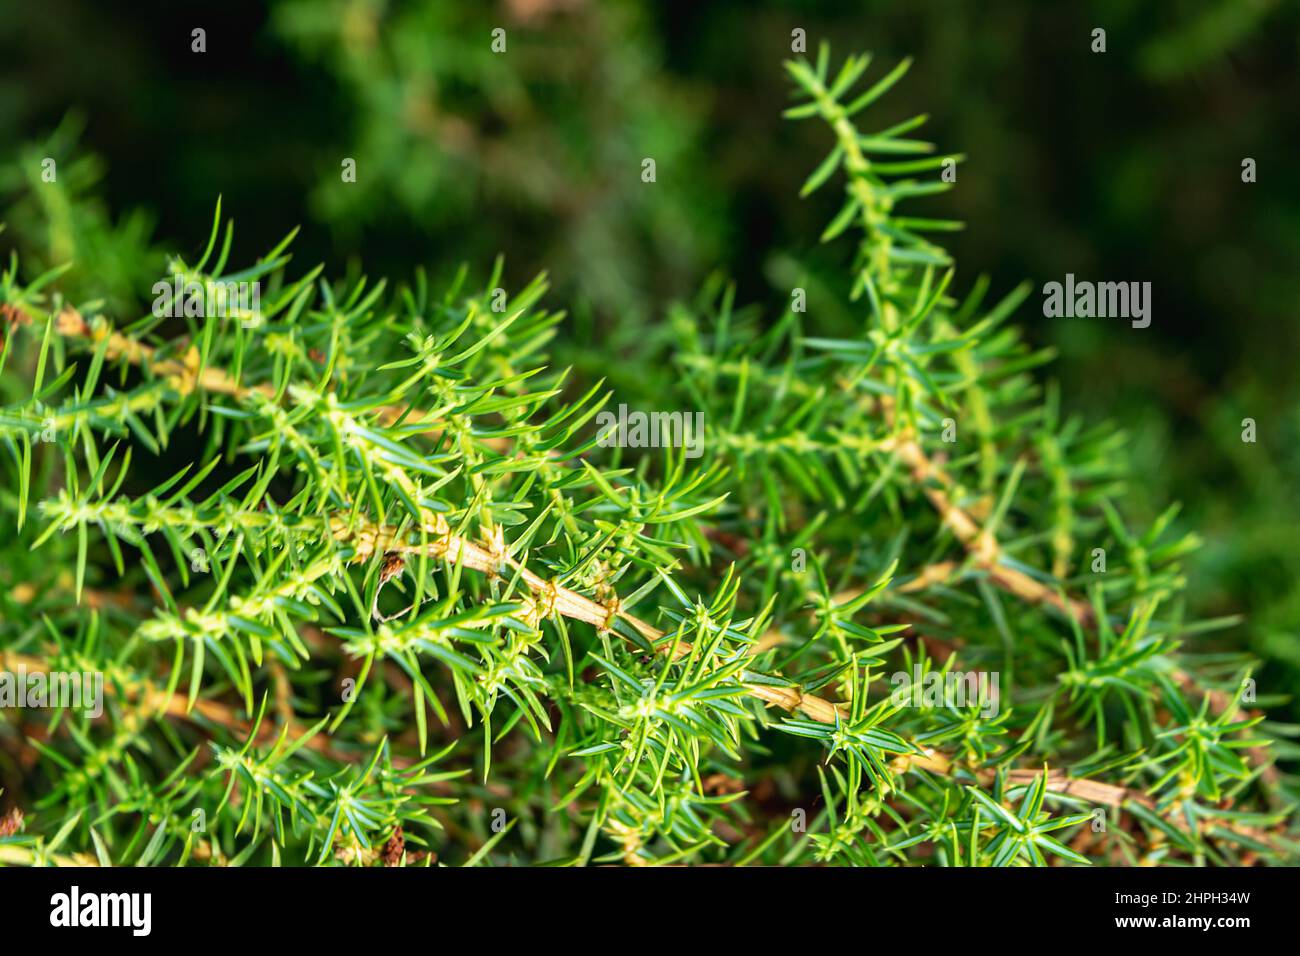 Branches of evergreen juniper Juniperus. Coniferous shrub for landscape design. natural background with selective focus. Horizontal photo. Stock Photo